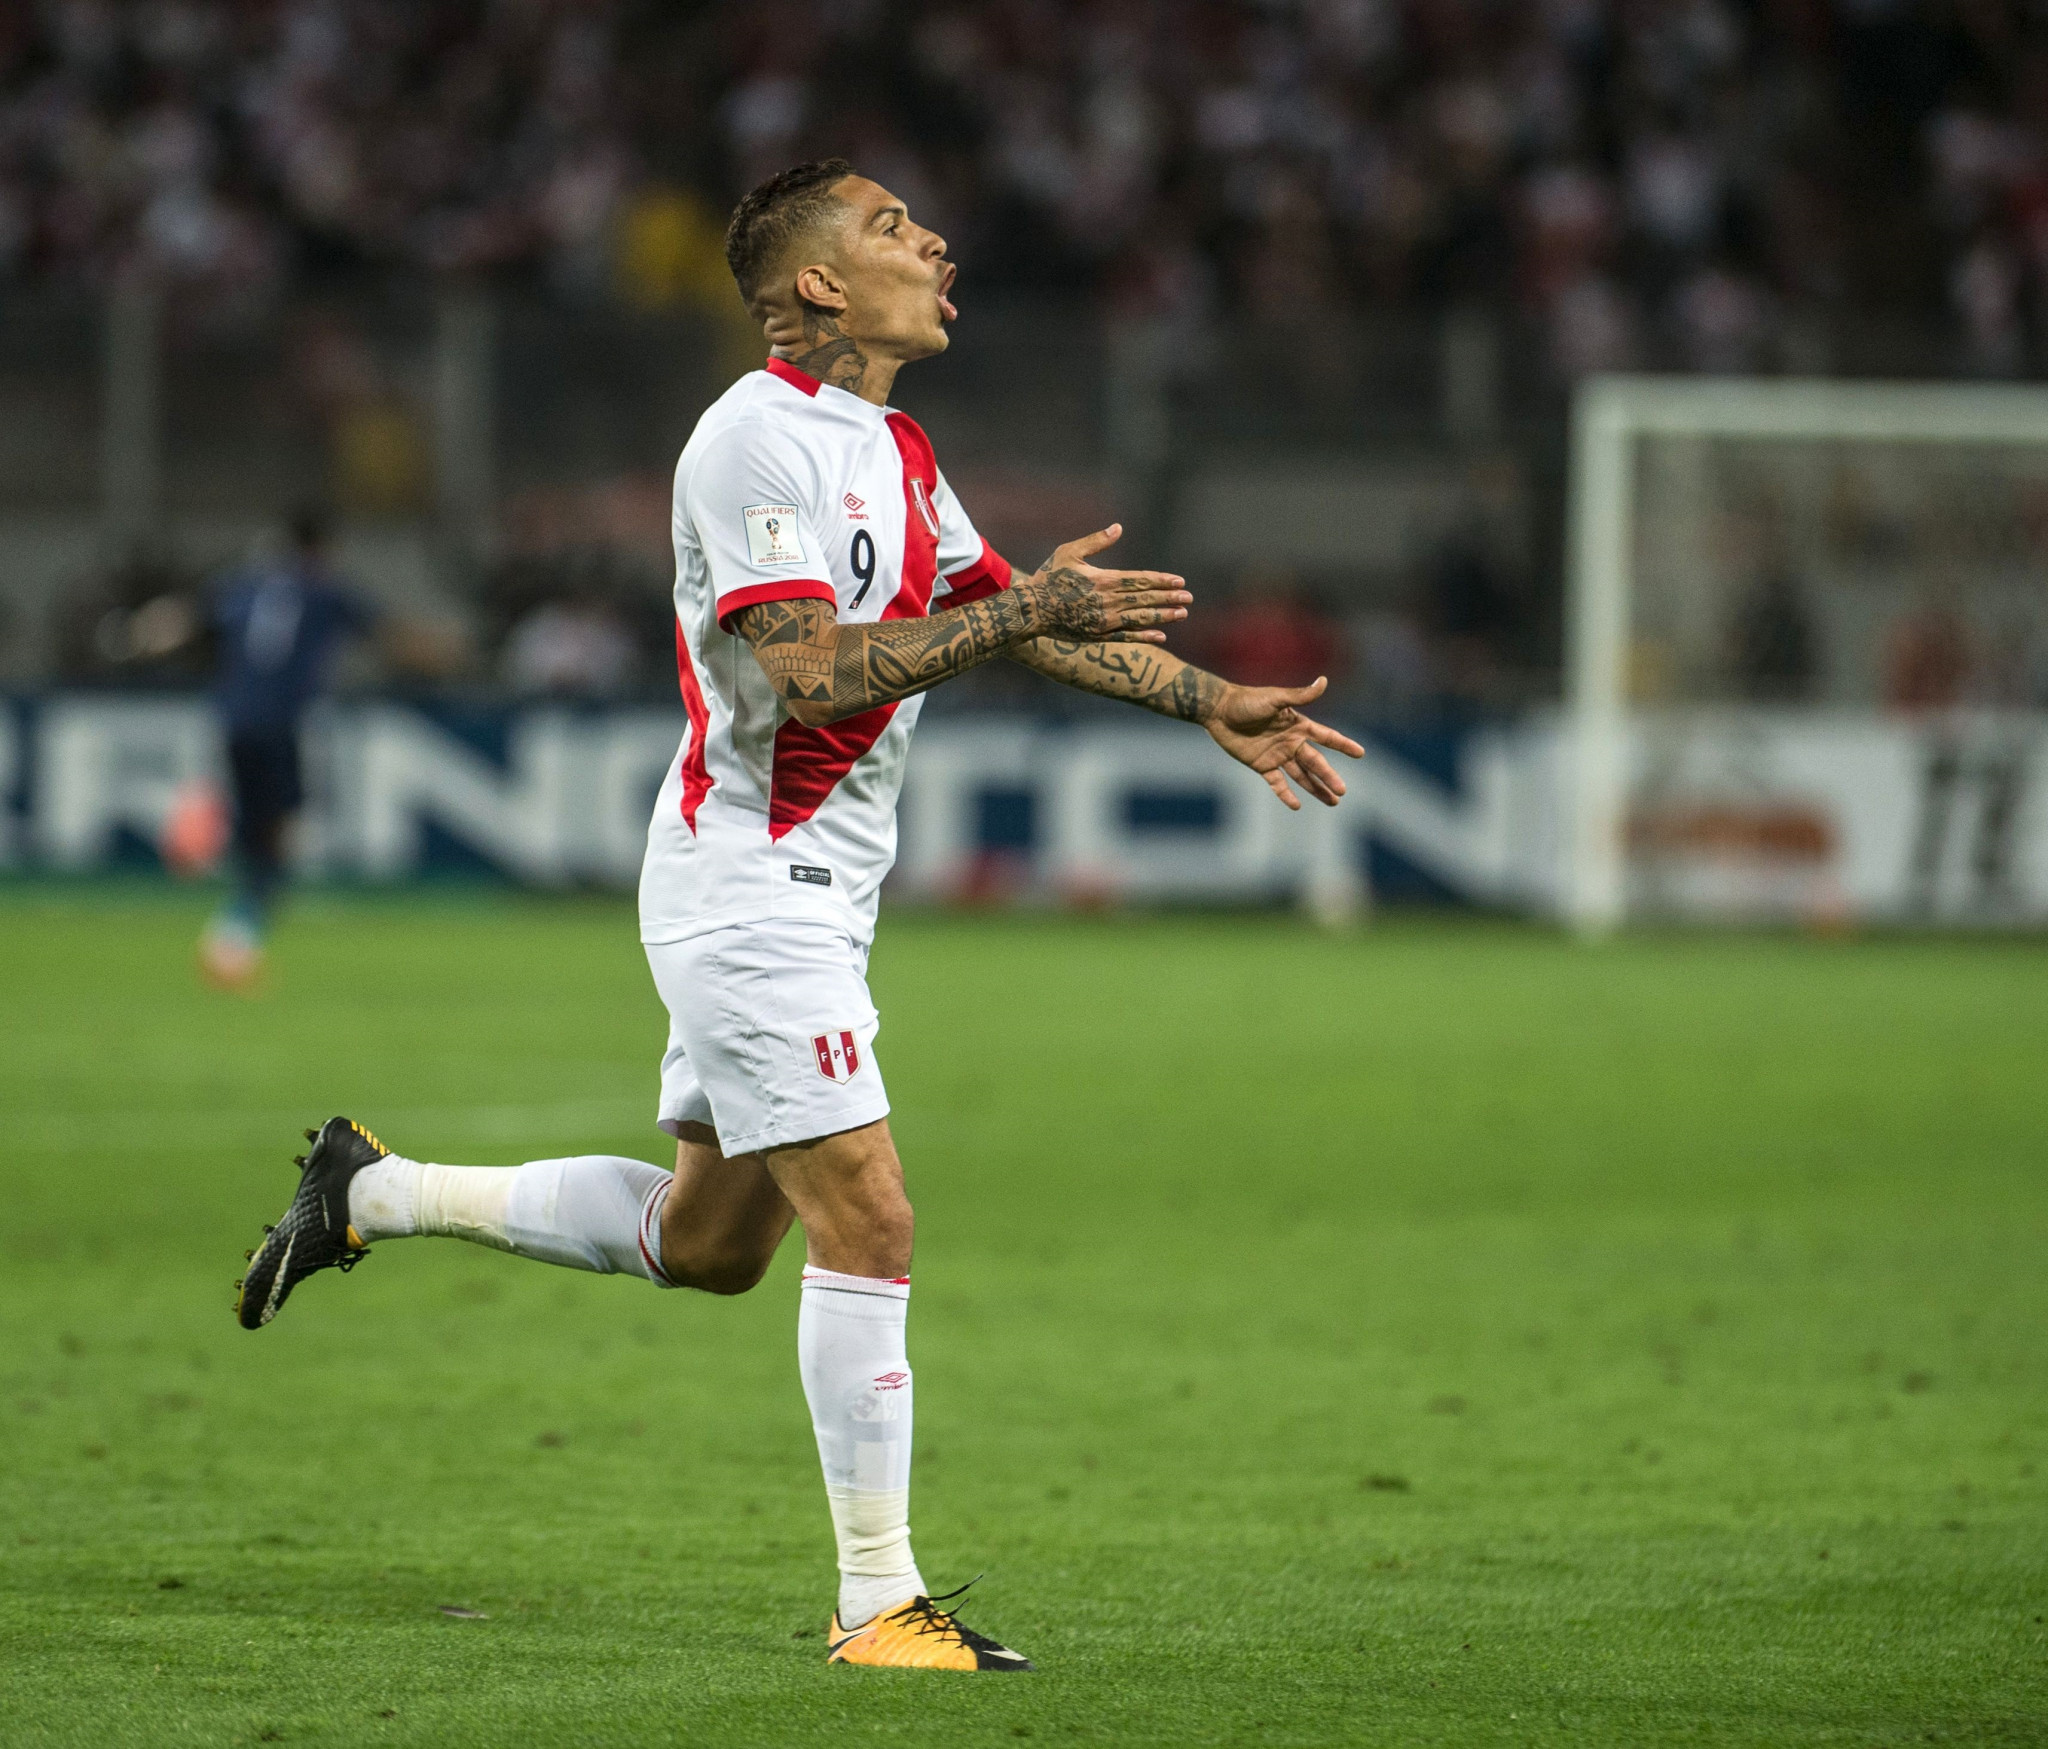 World players' union FIFPro says it has written to FIFA to request that Peru captain Paolo Guerrero be permitted to take part in the 2018 World Cup ©Getty Images